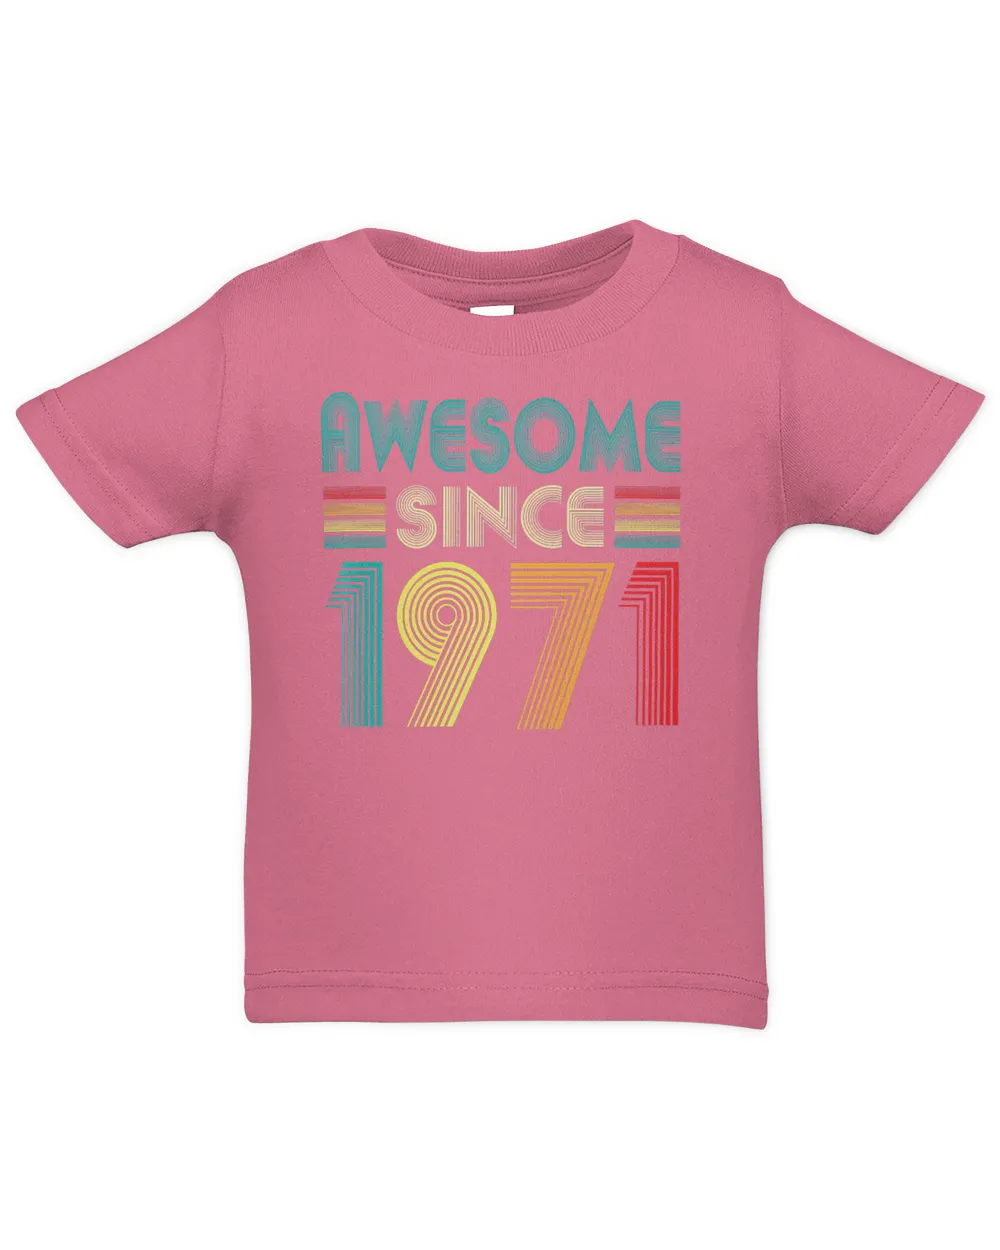 Awesome Since 1971 51st Birthday Gifts 51 Years Old Vintage T-Shirt